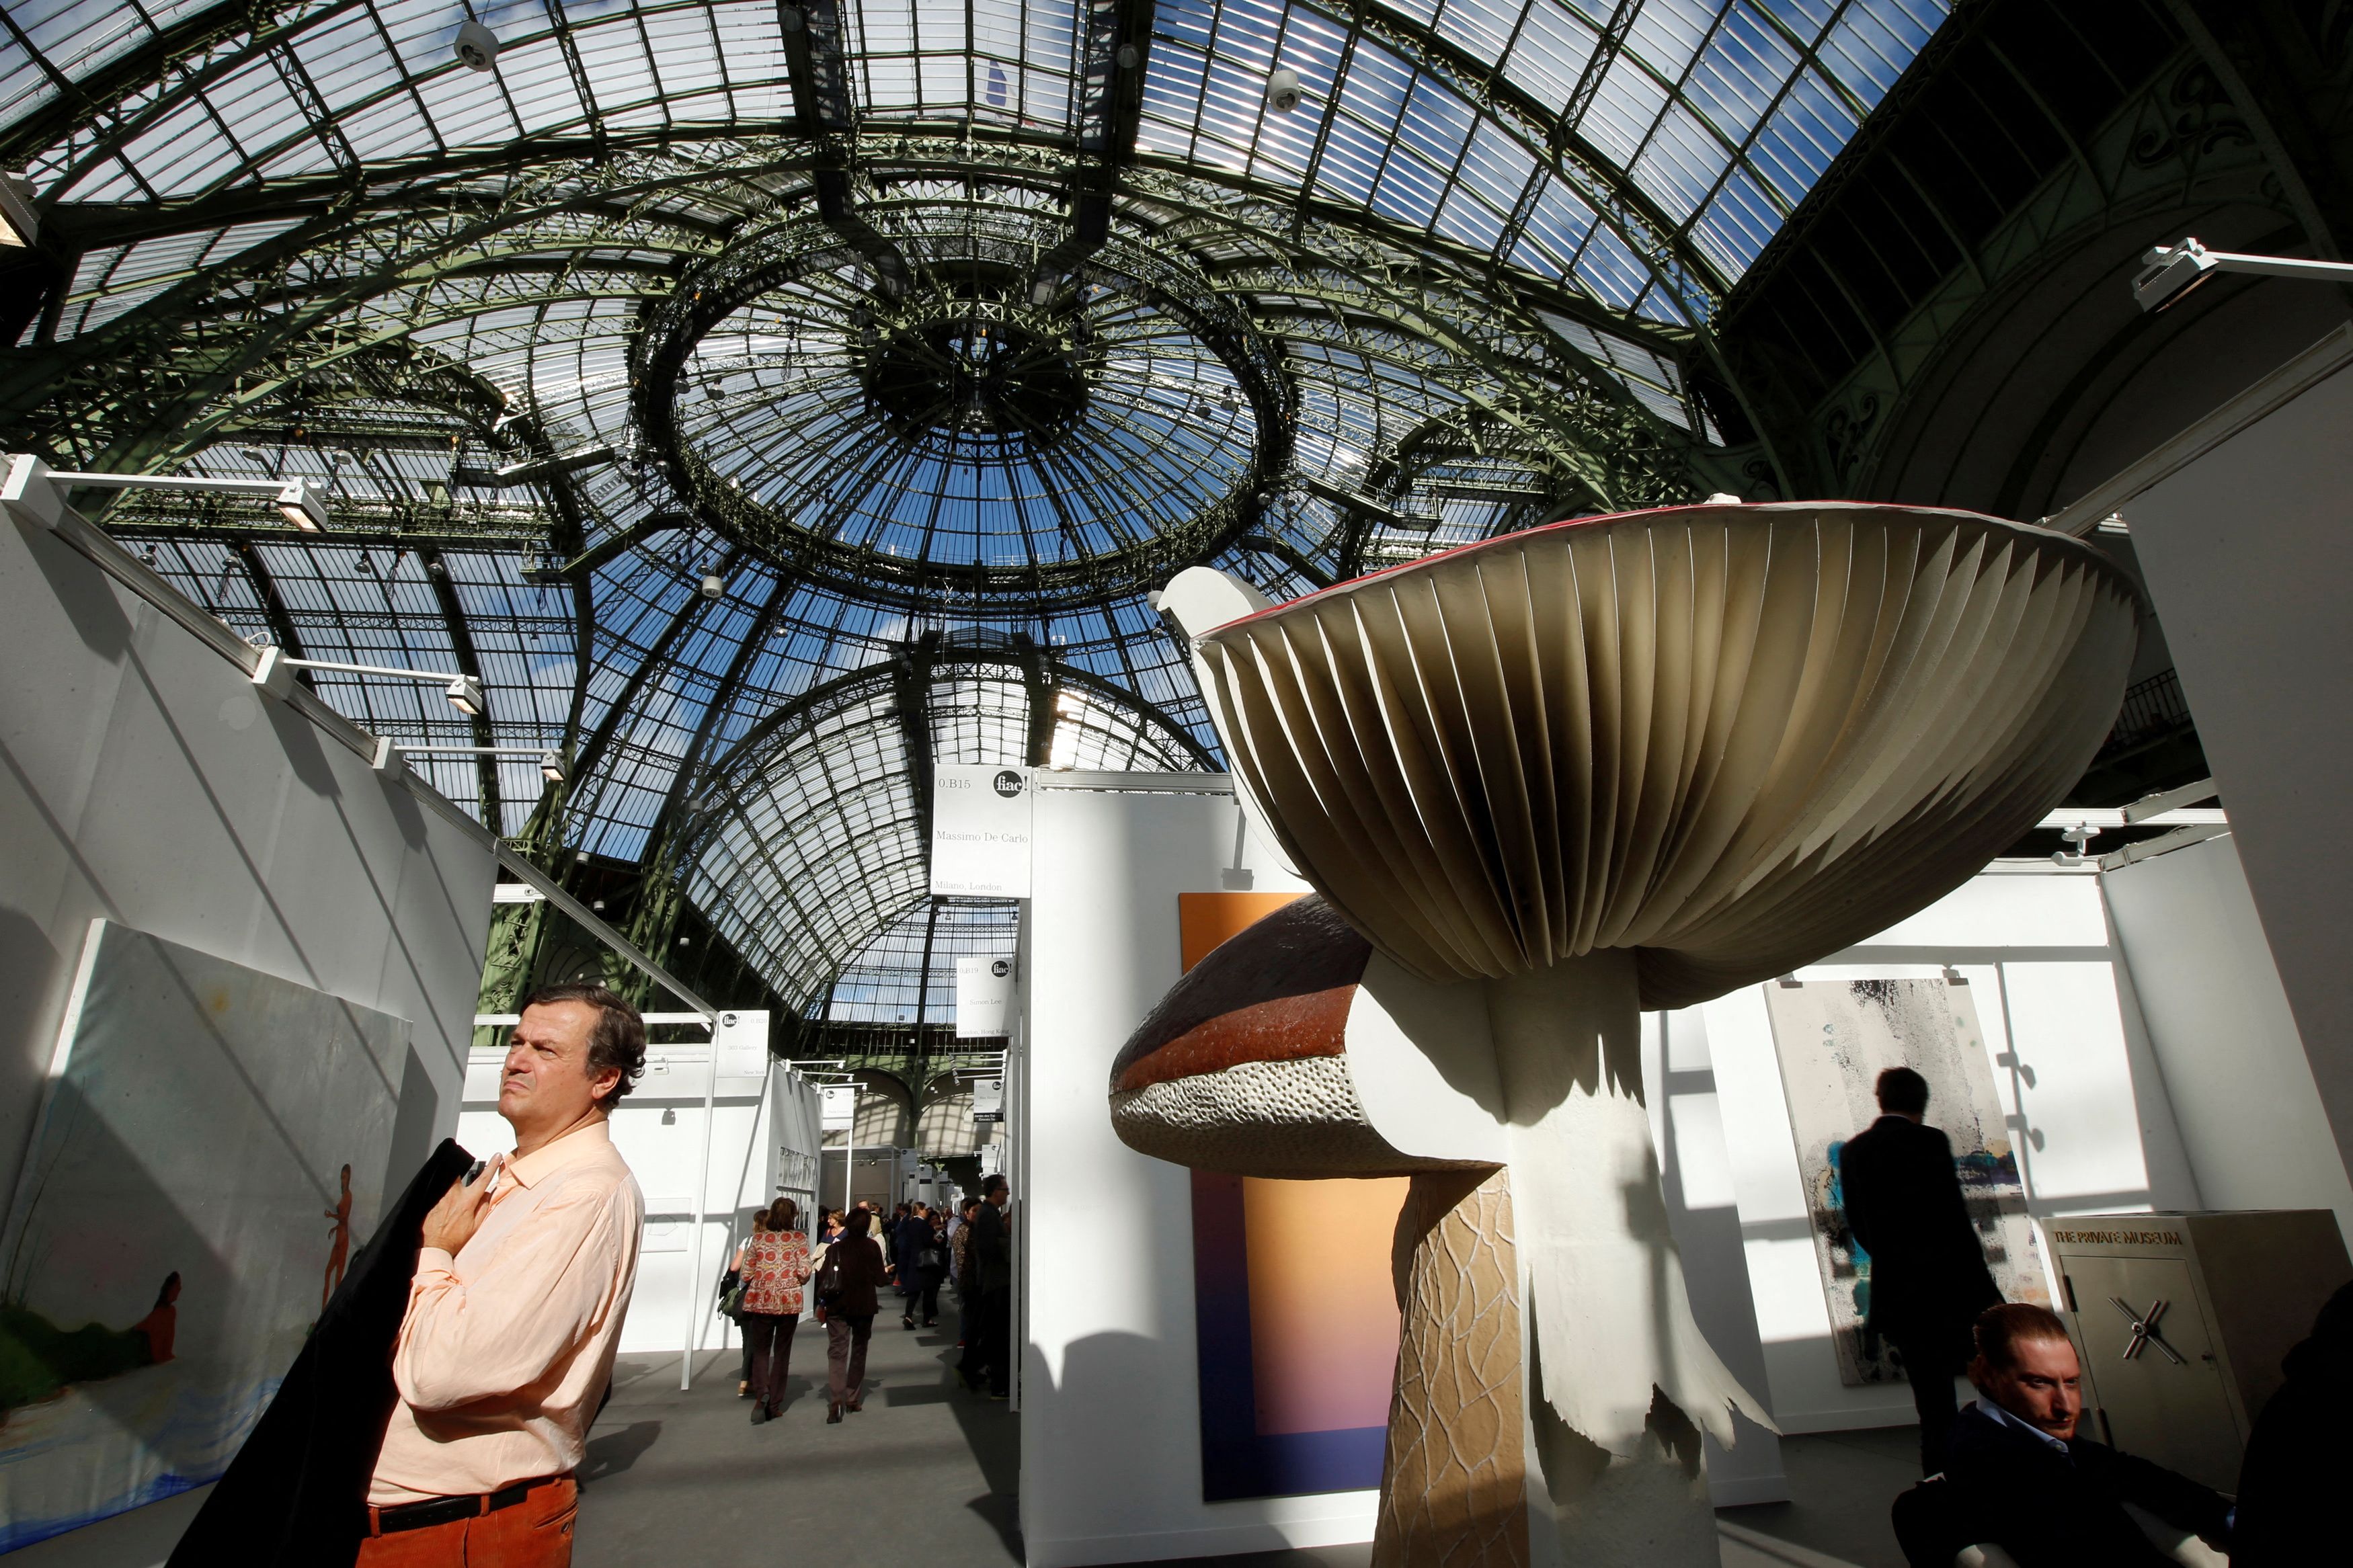 A visitor walks past art works by artist Carsten Holler during the International Contemporary Art Fair at the Grand Palais in Paris